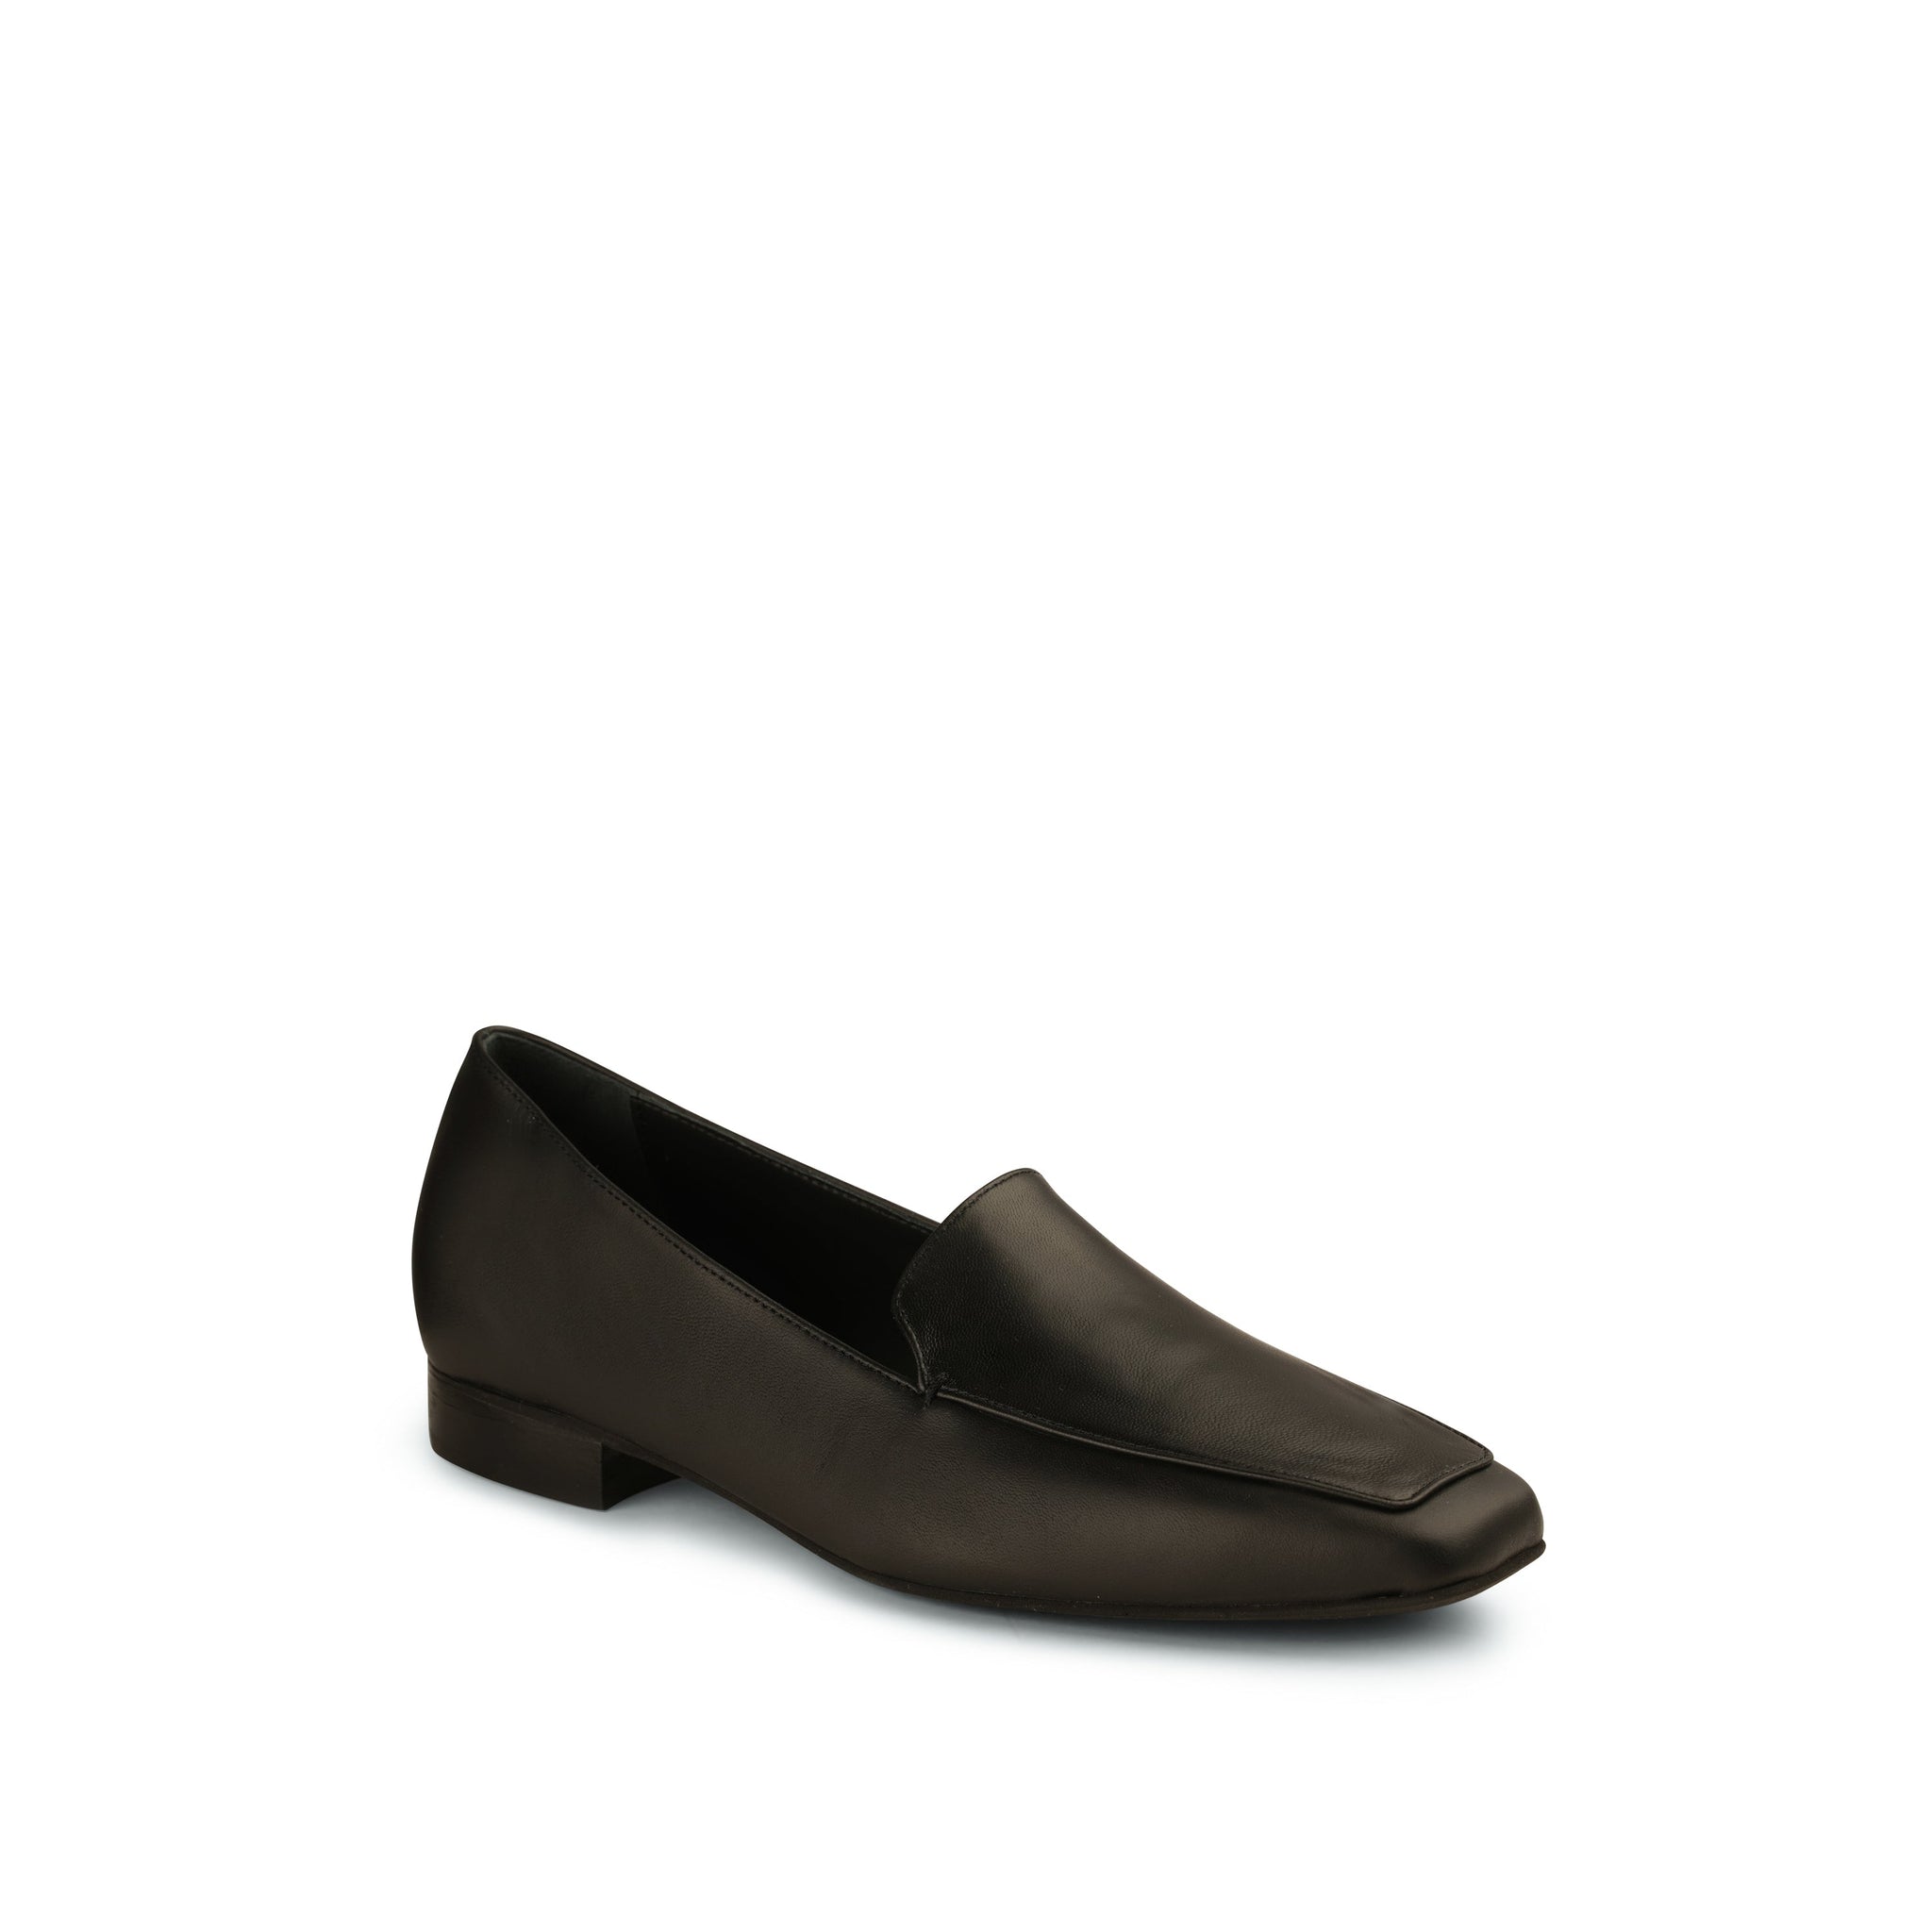 Christina Flexlite Loafers  Women's Italian Leather Loafers